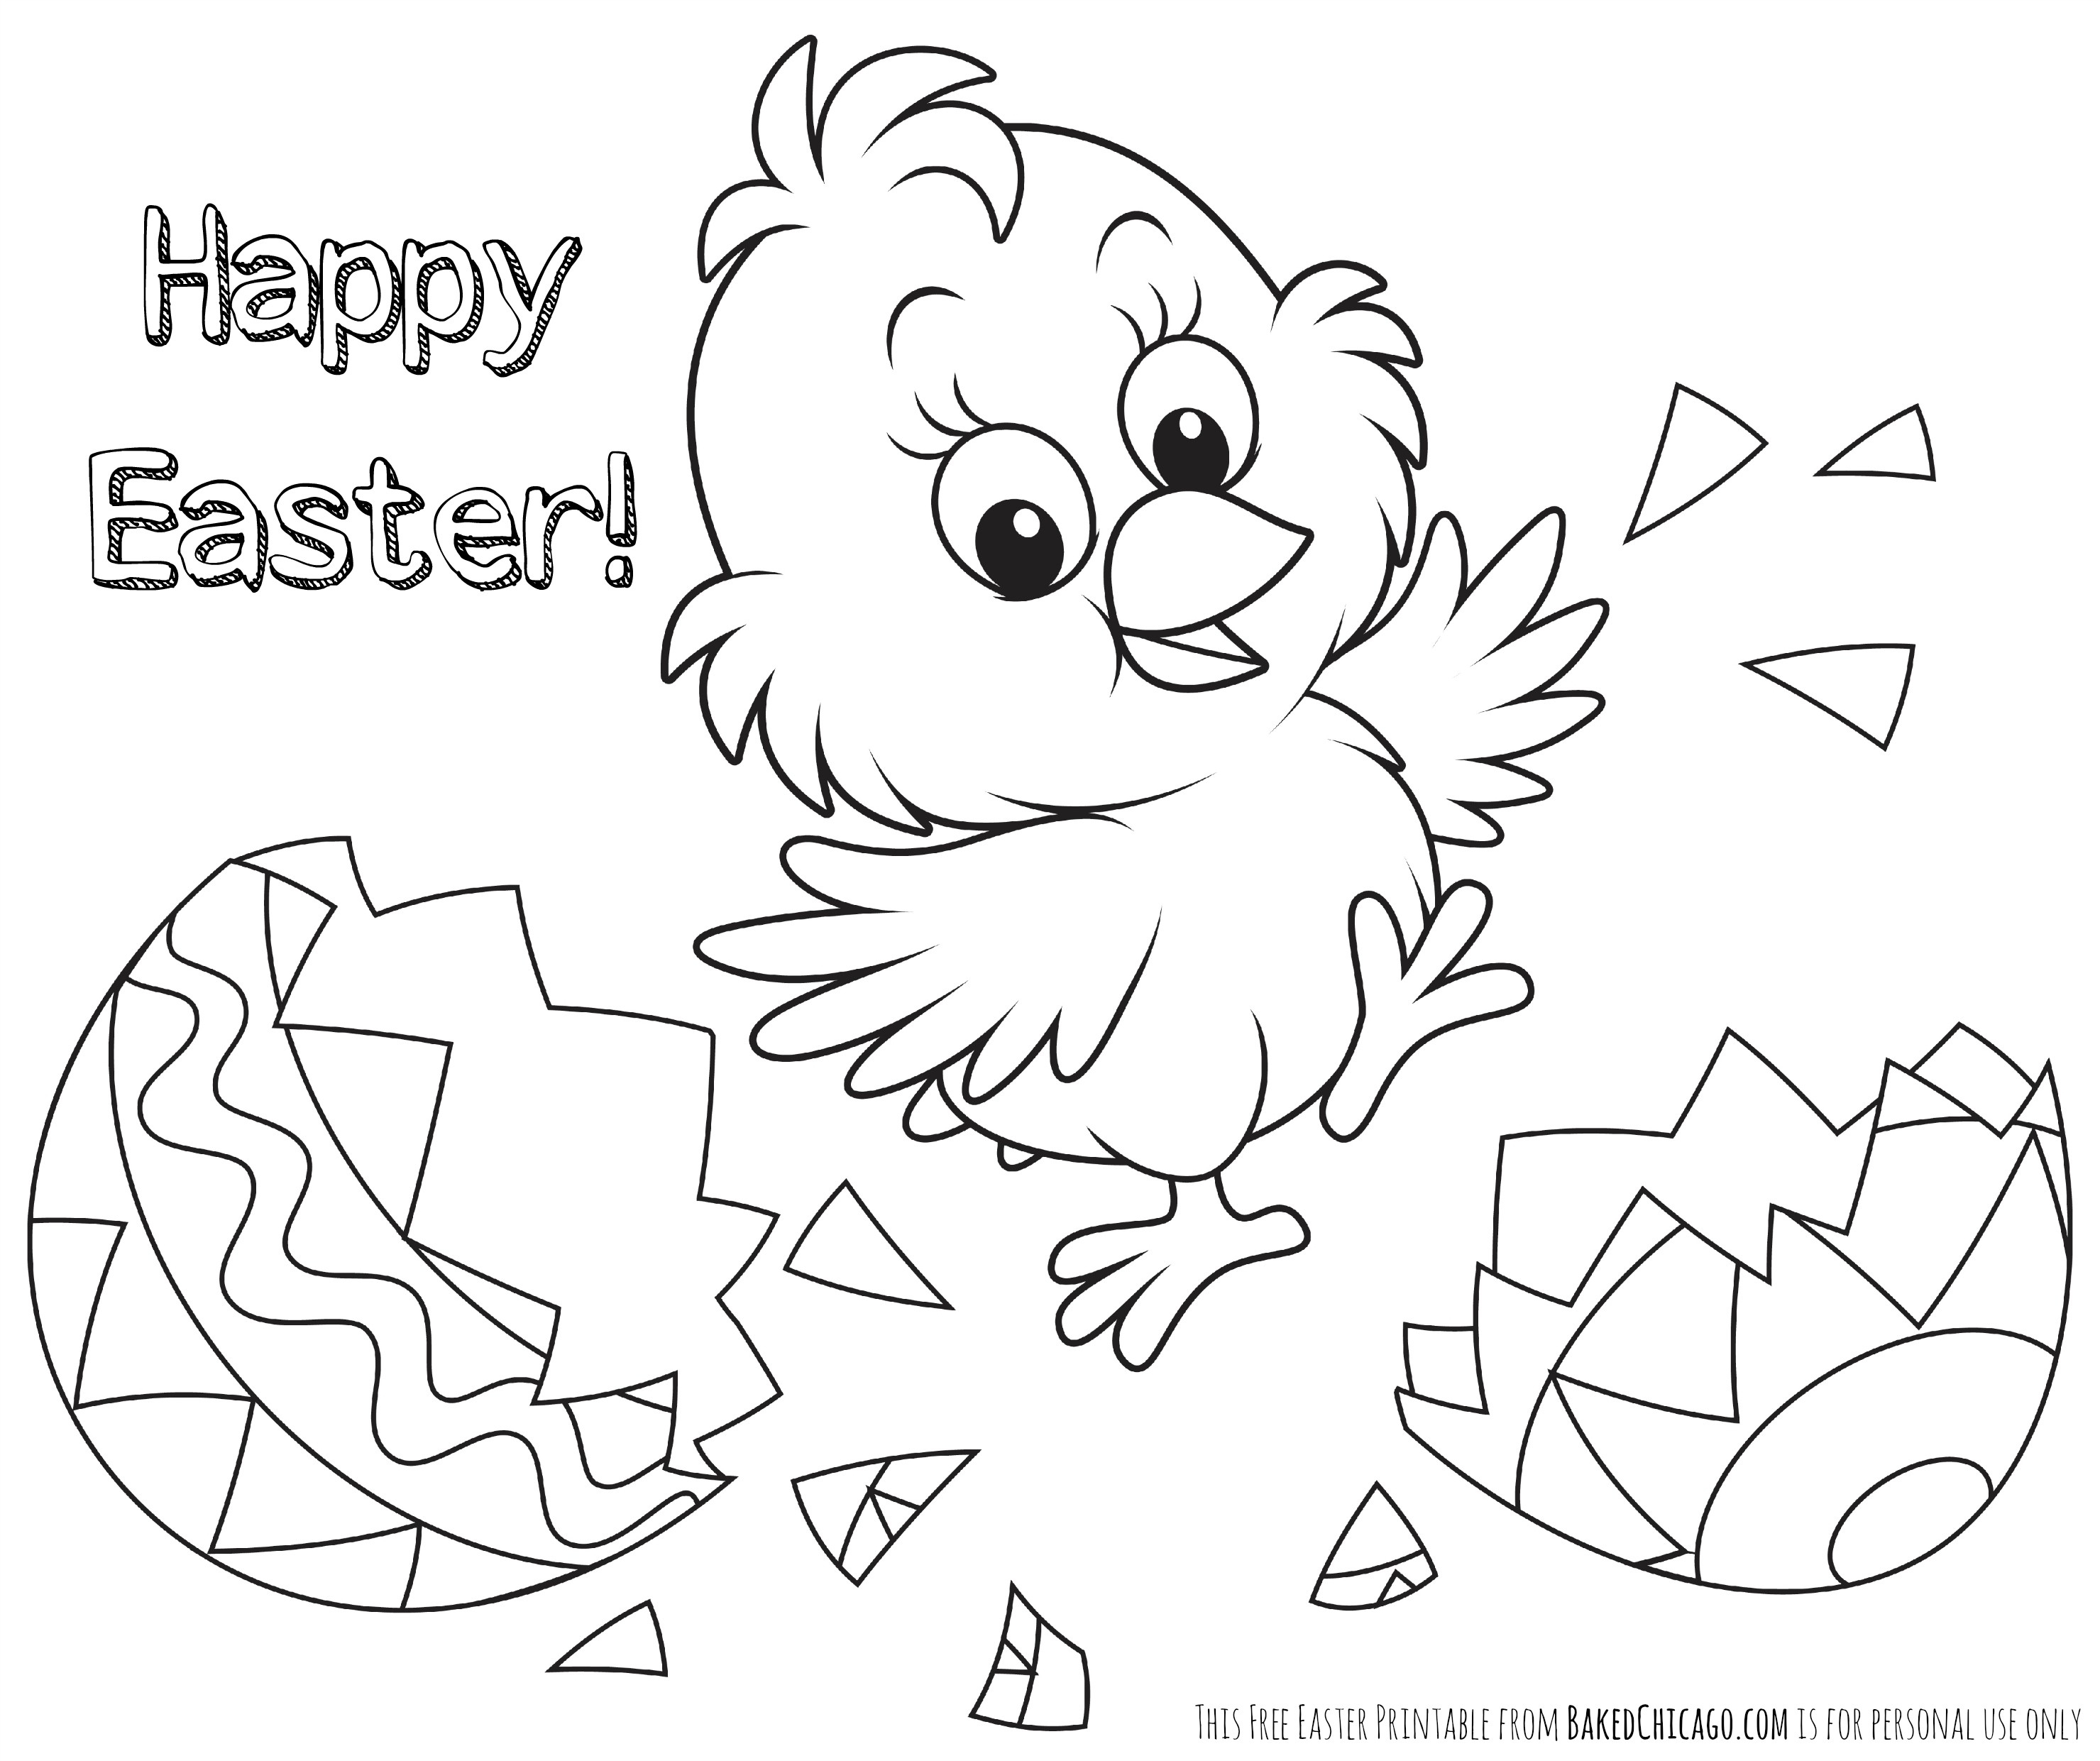 Coloring Pages : Free Easter Coloringes For Kidsfree To Print - Free Printable Easter Colouring Sheets